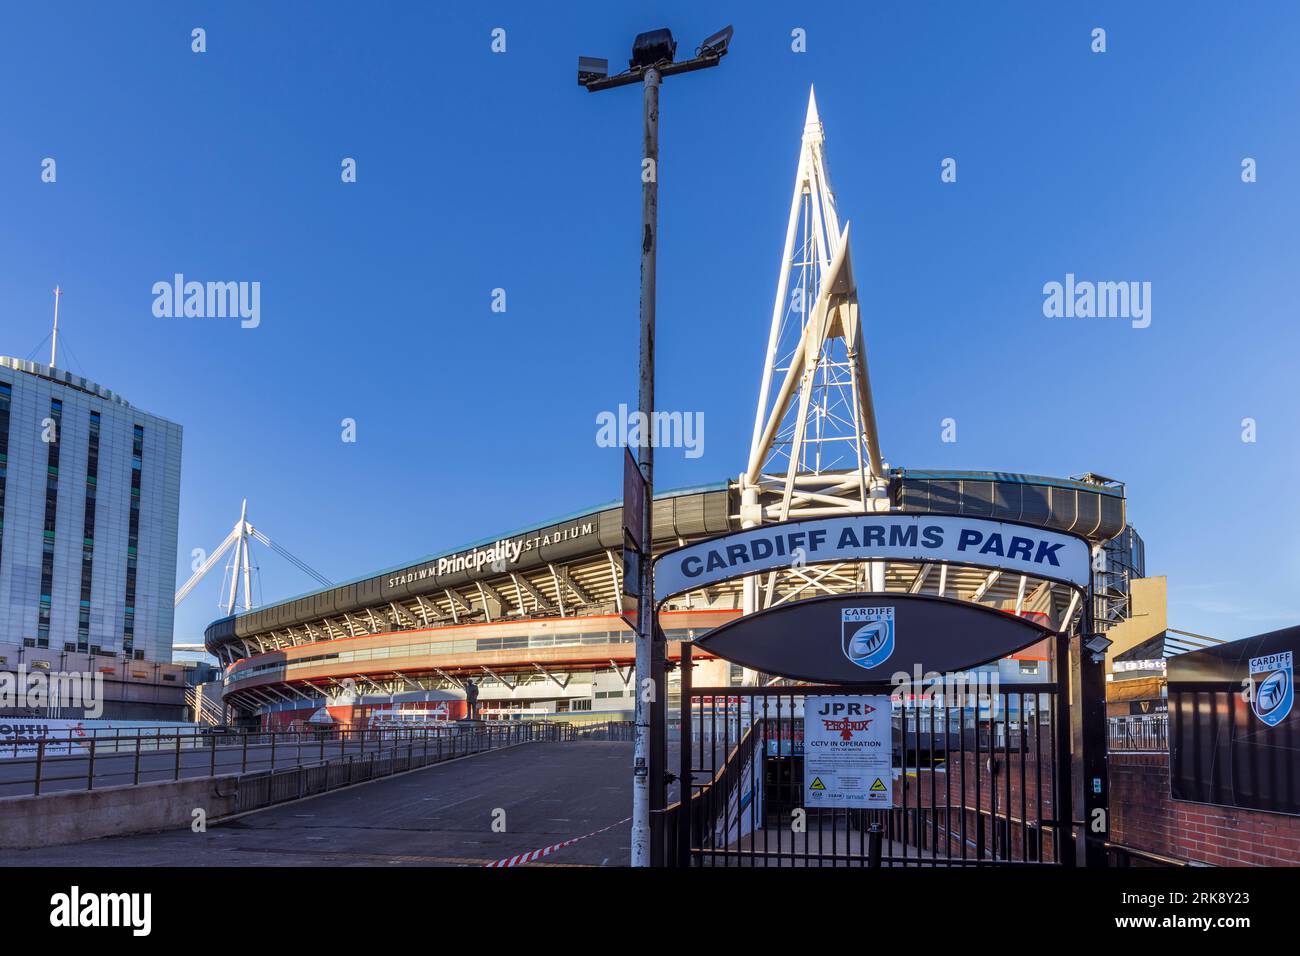 Cardiff Arms Park, Cardiff, Wales, UK Stock Photo